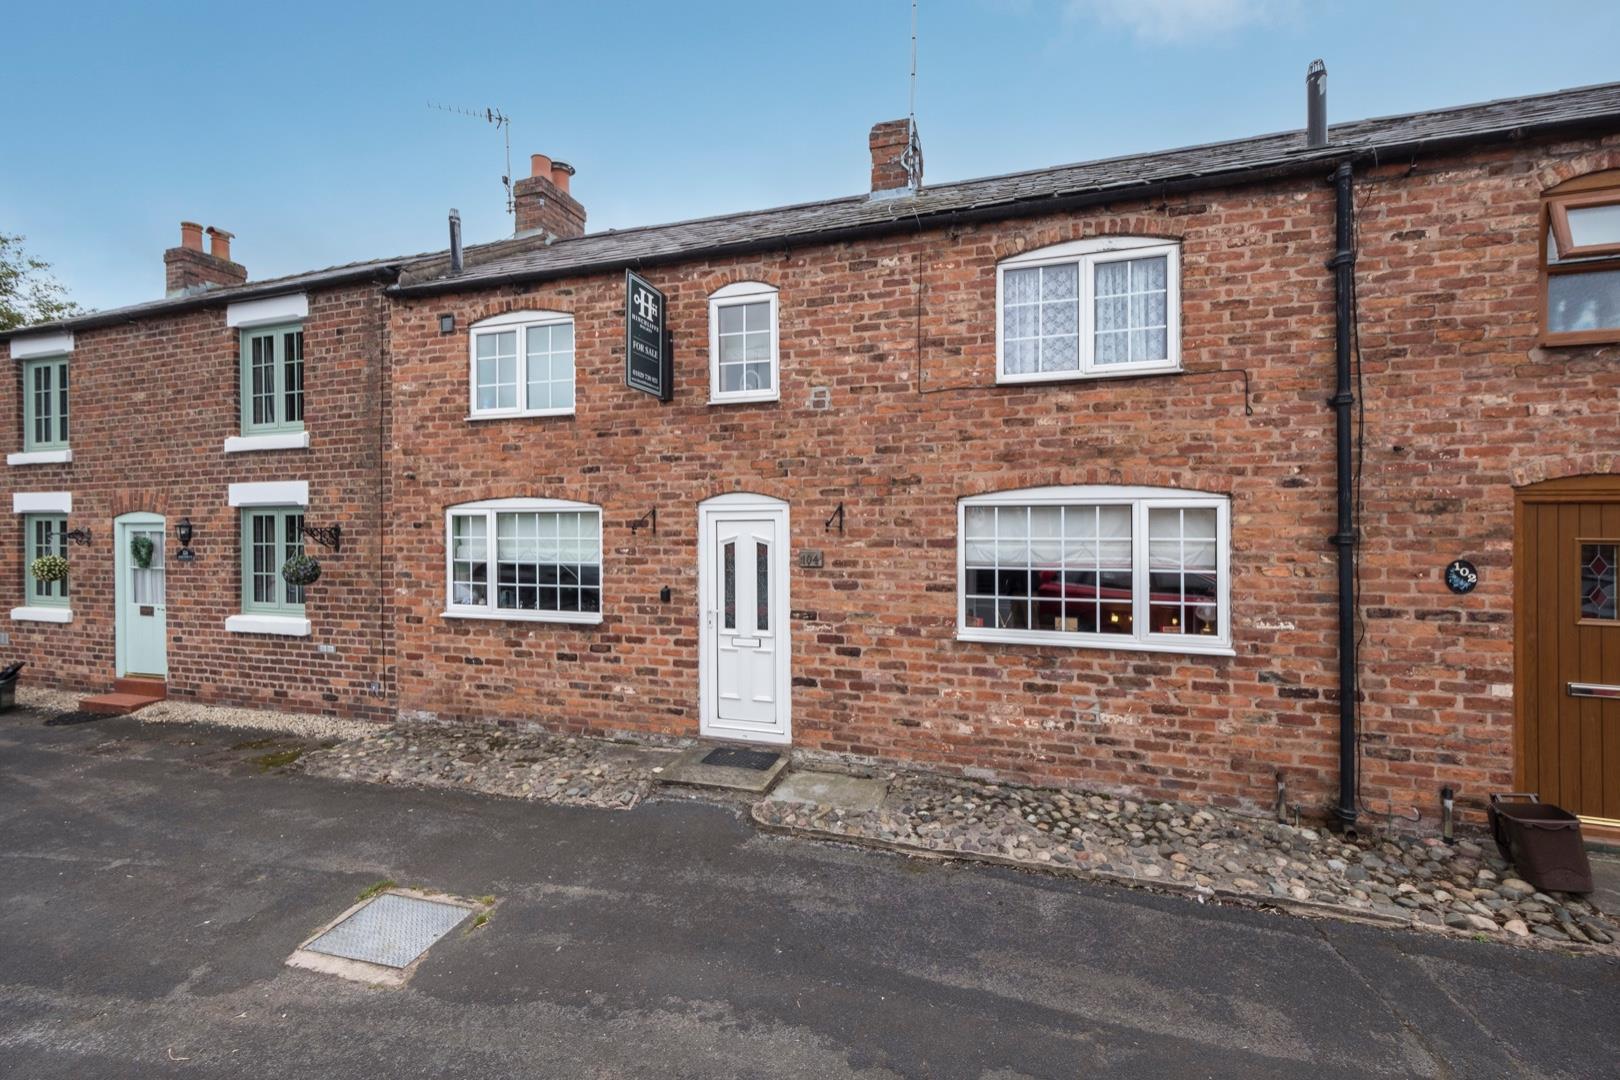 3 bedroom  Terraced House for Sale in Tarvin